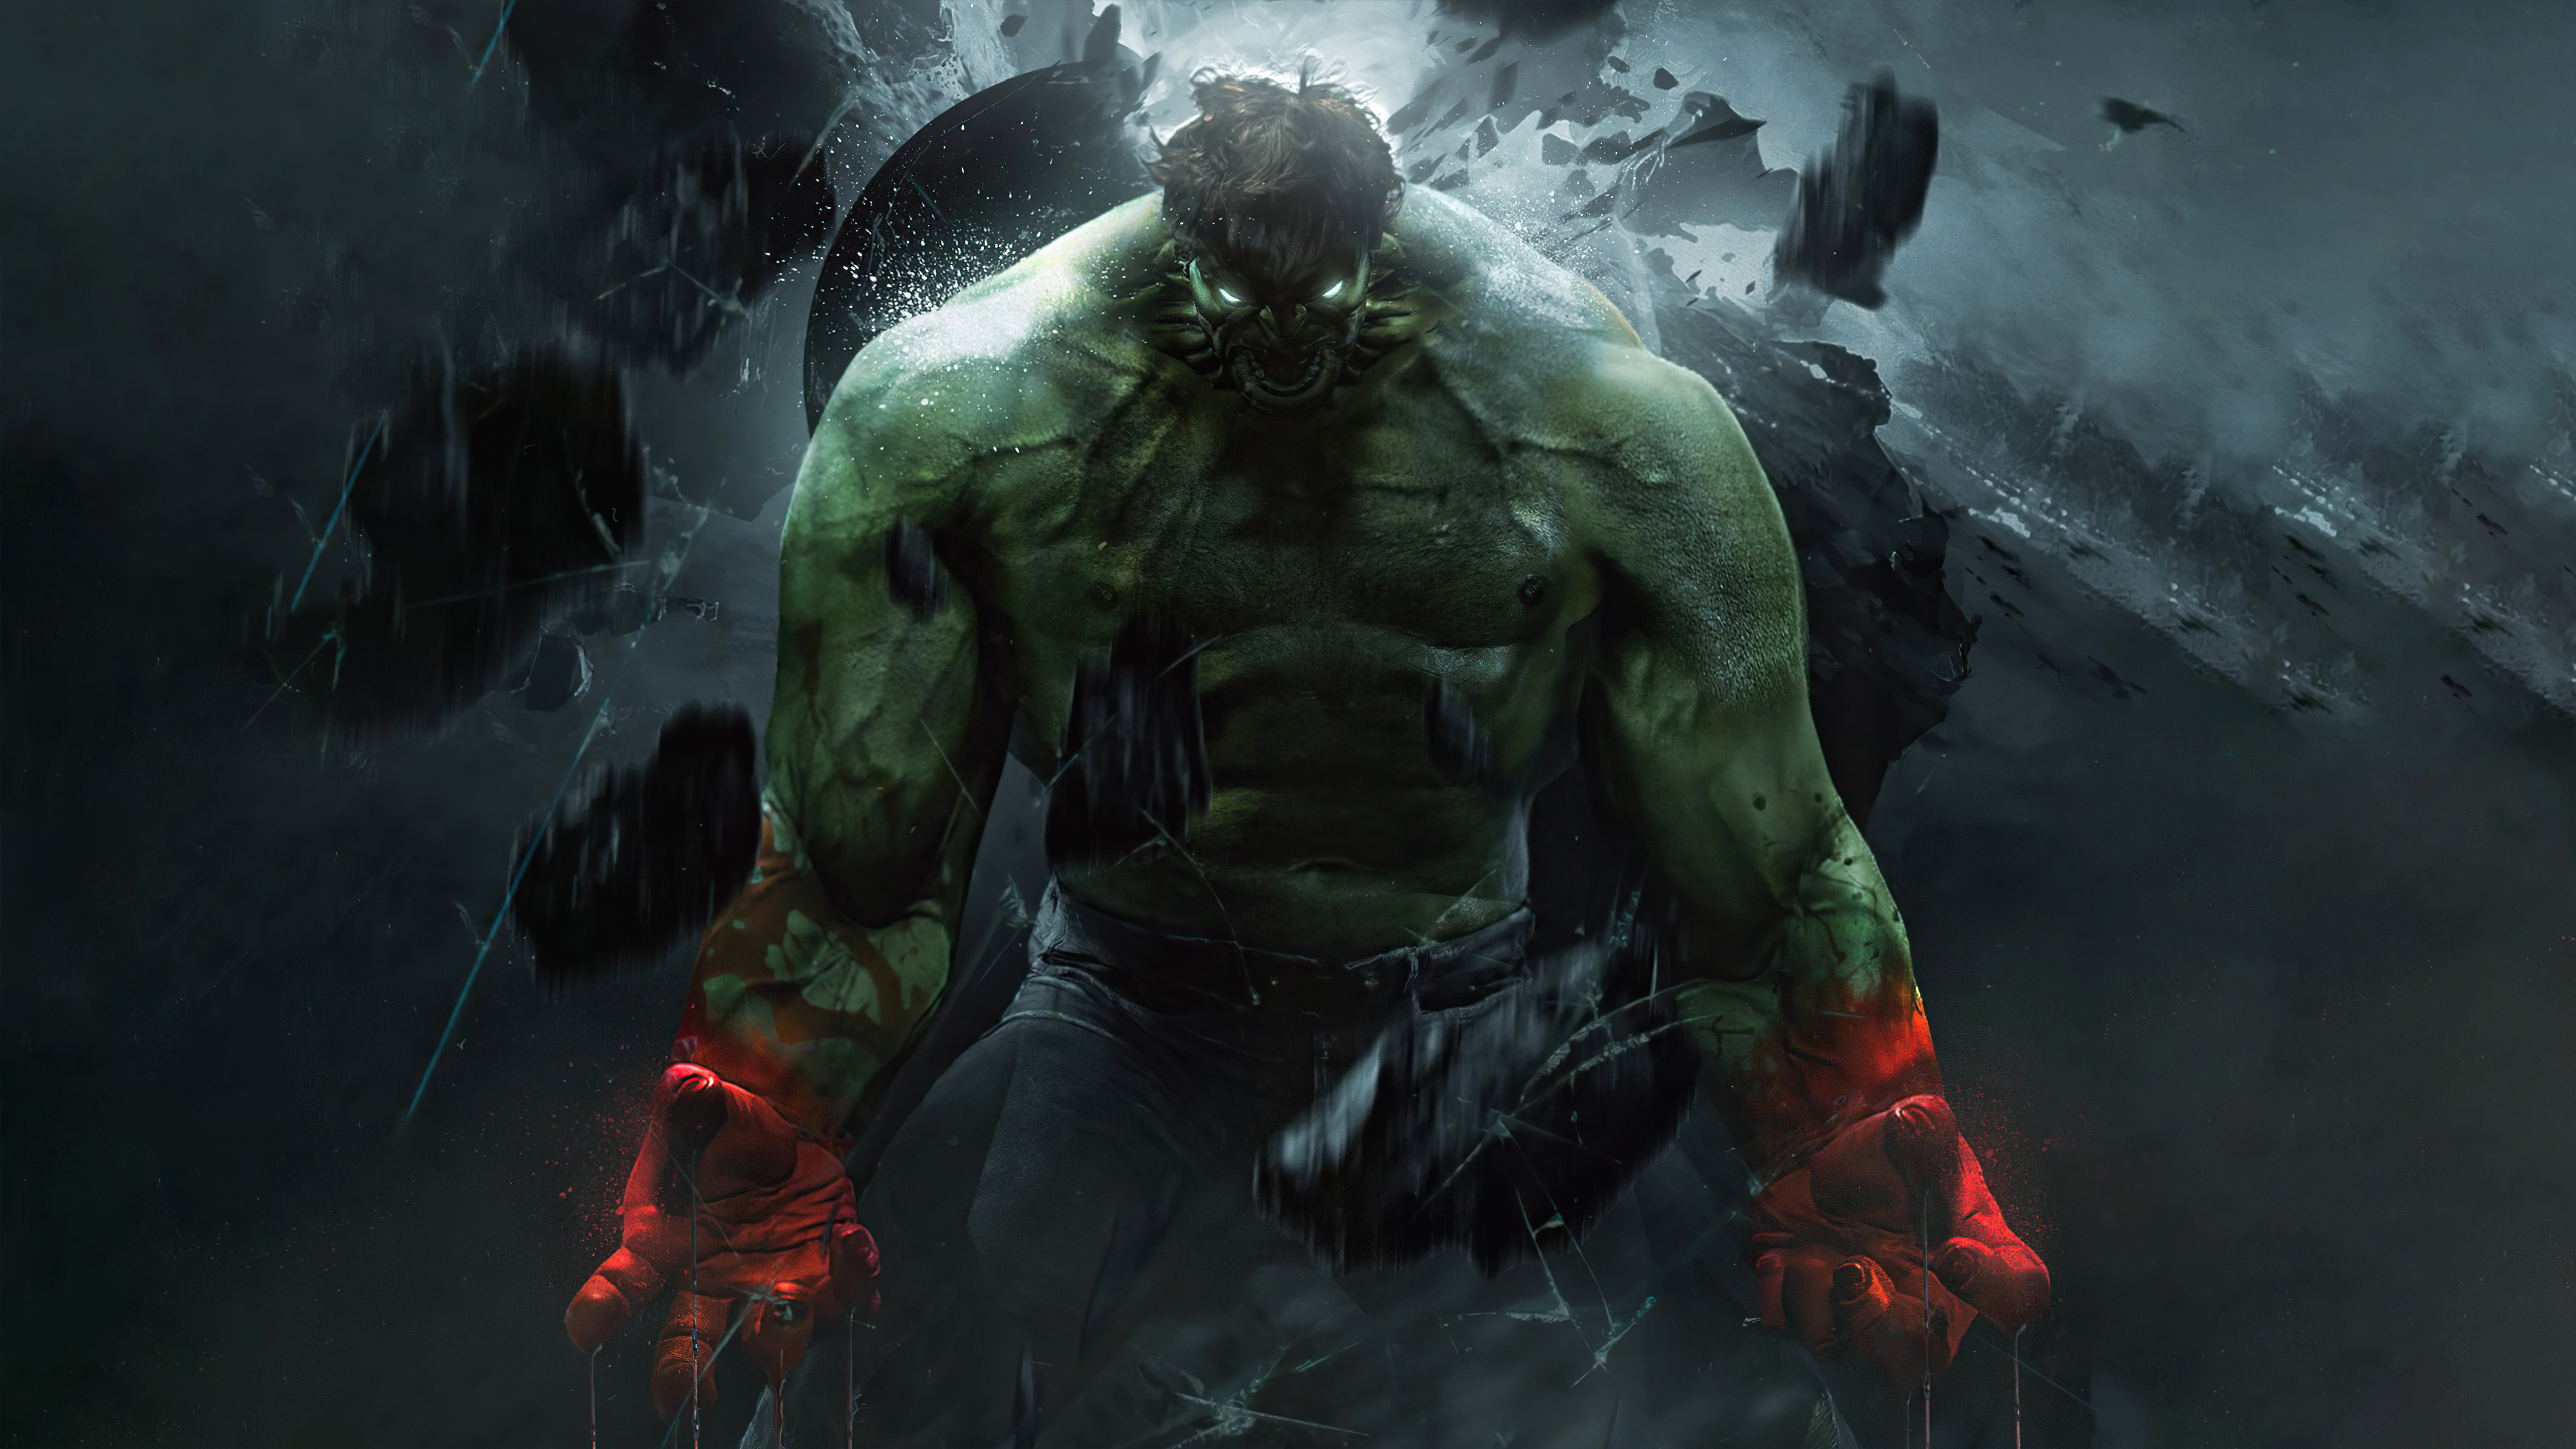 230+ Hulk HD Wallpapers and Backgrounds